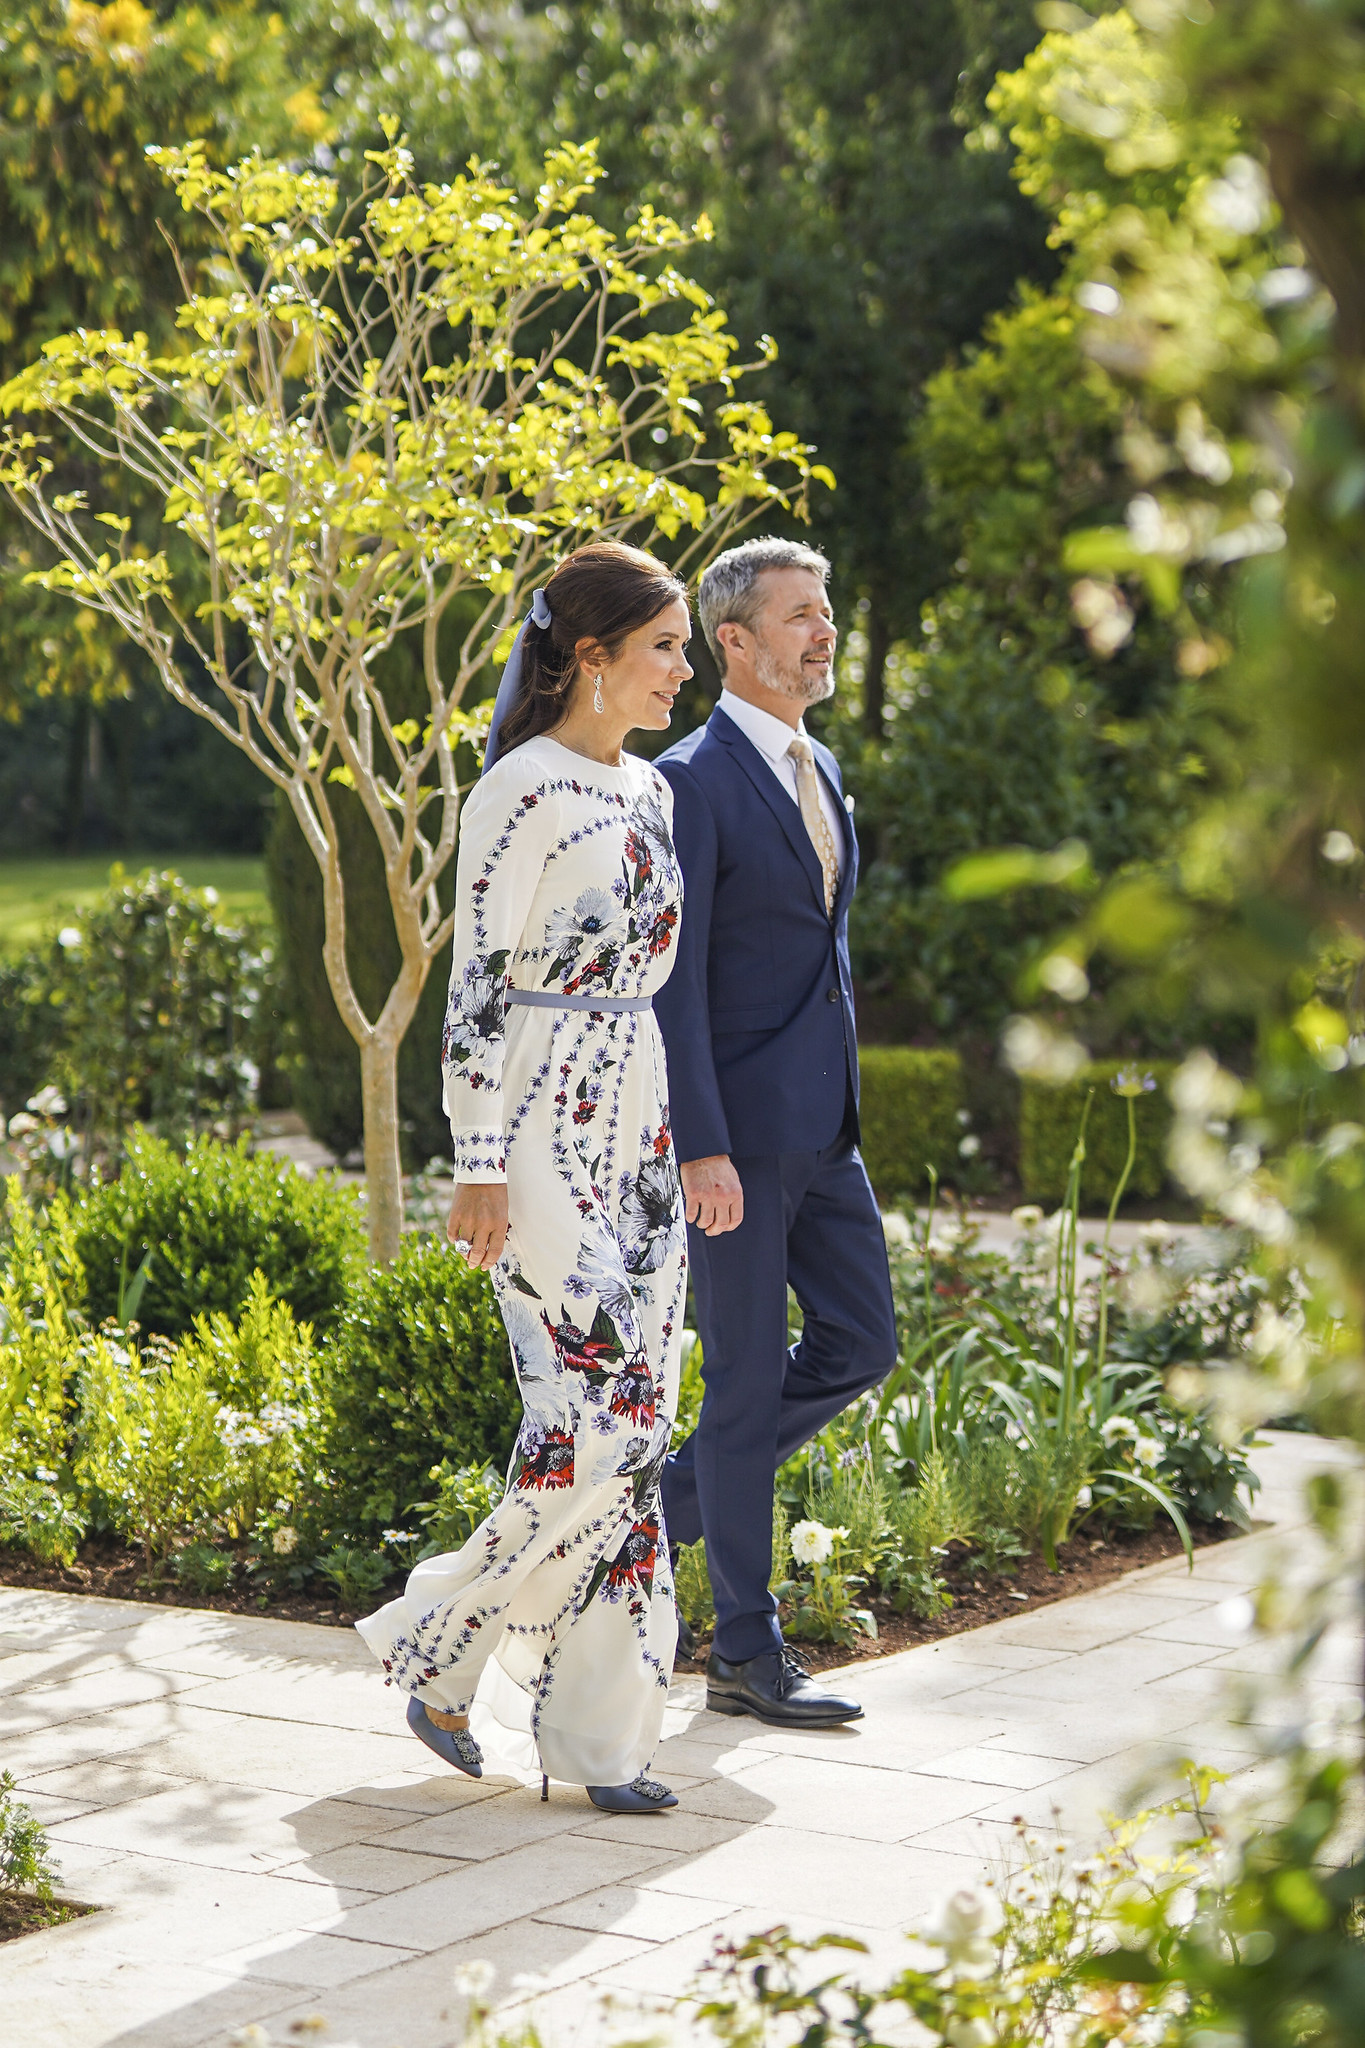 CROWN PRINCE FREDERIK OF DENMARK AND HIS WIFE MARY, prince hussein's wedding